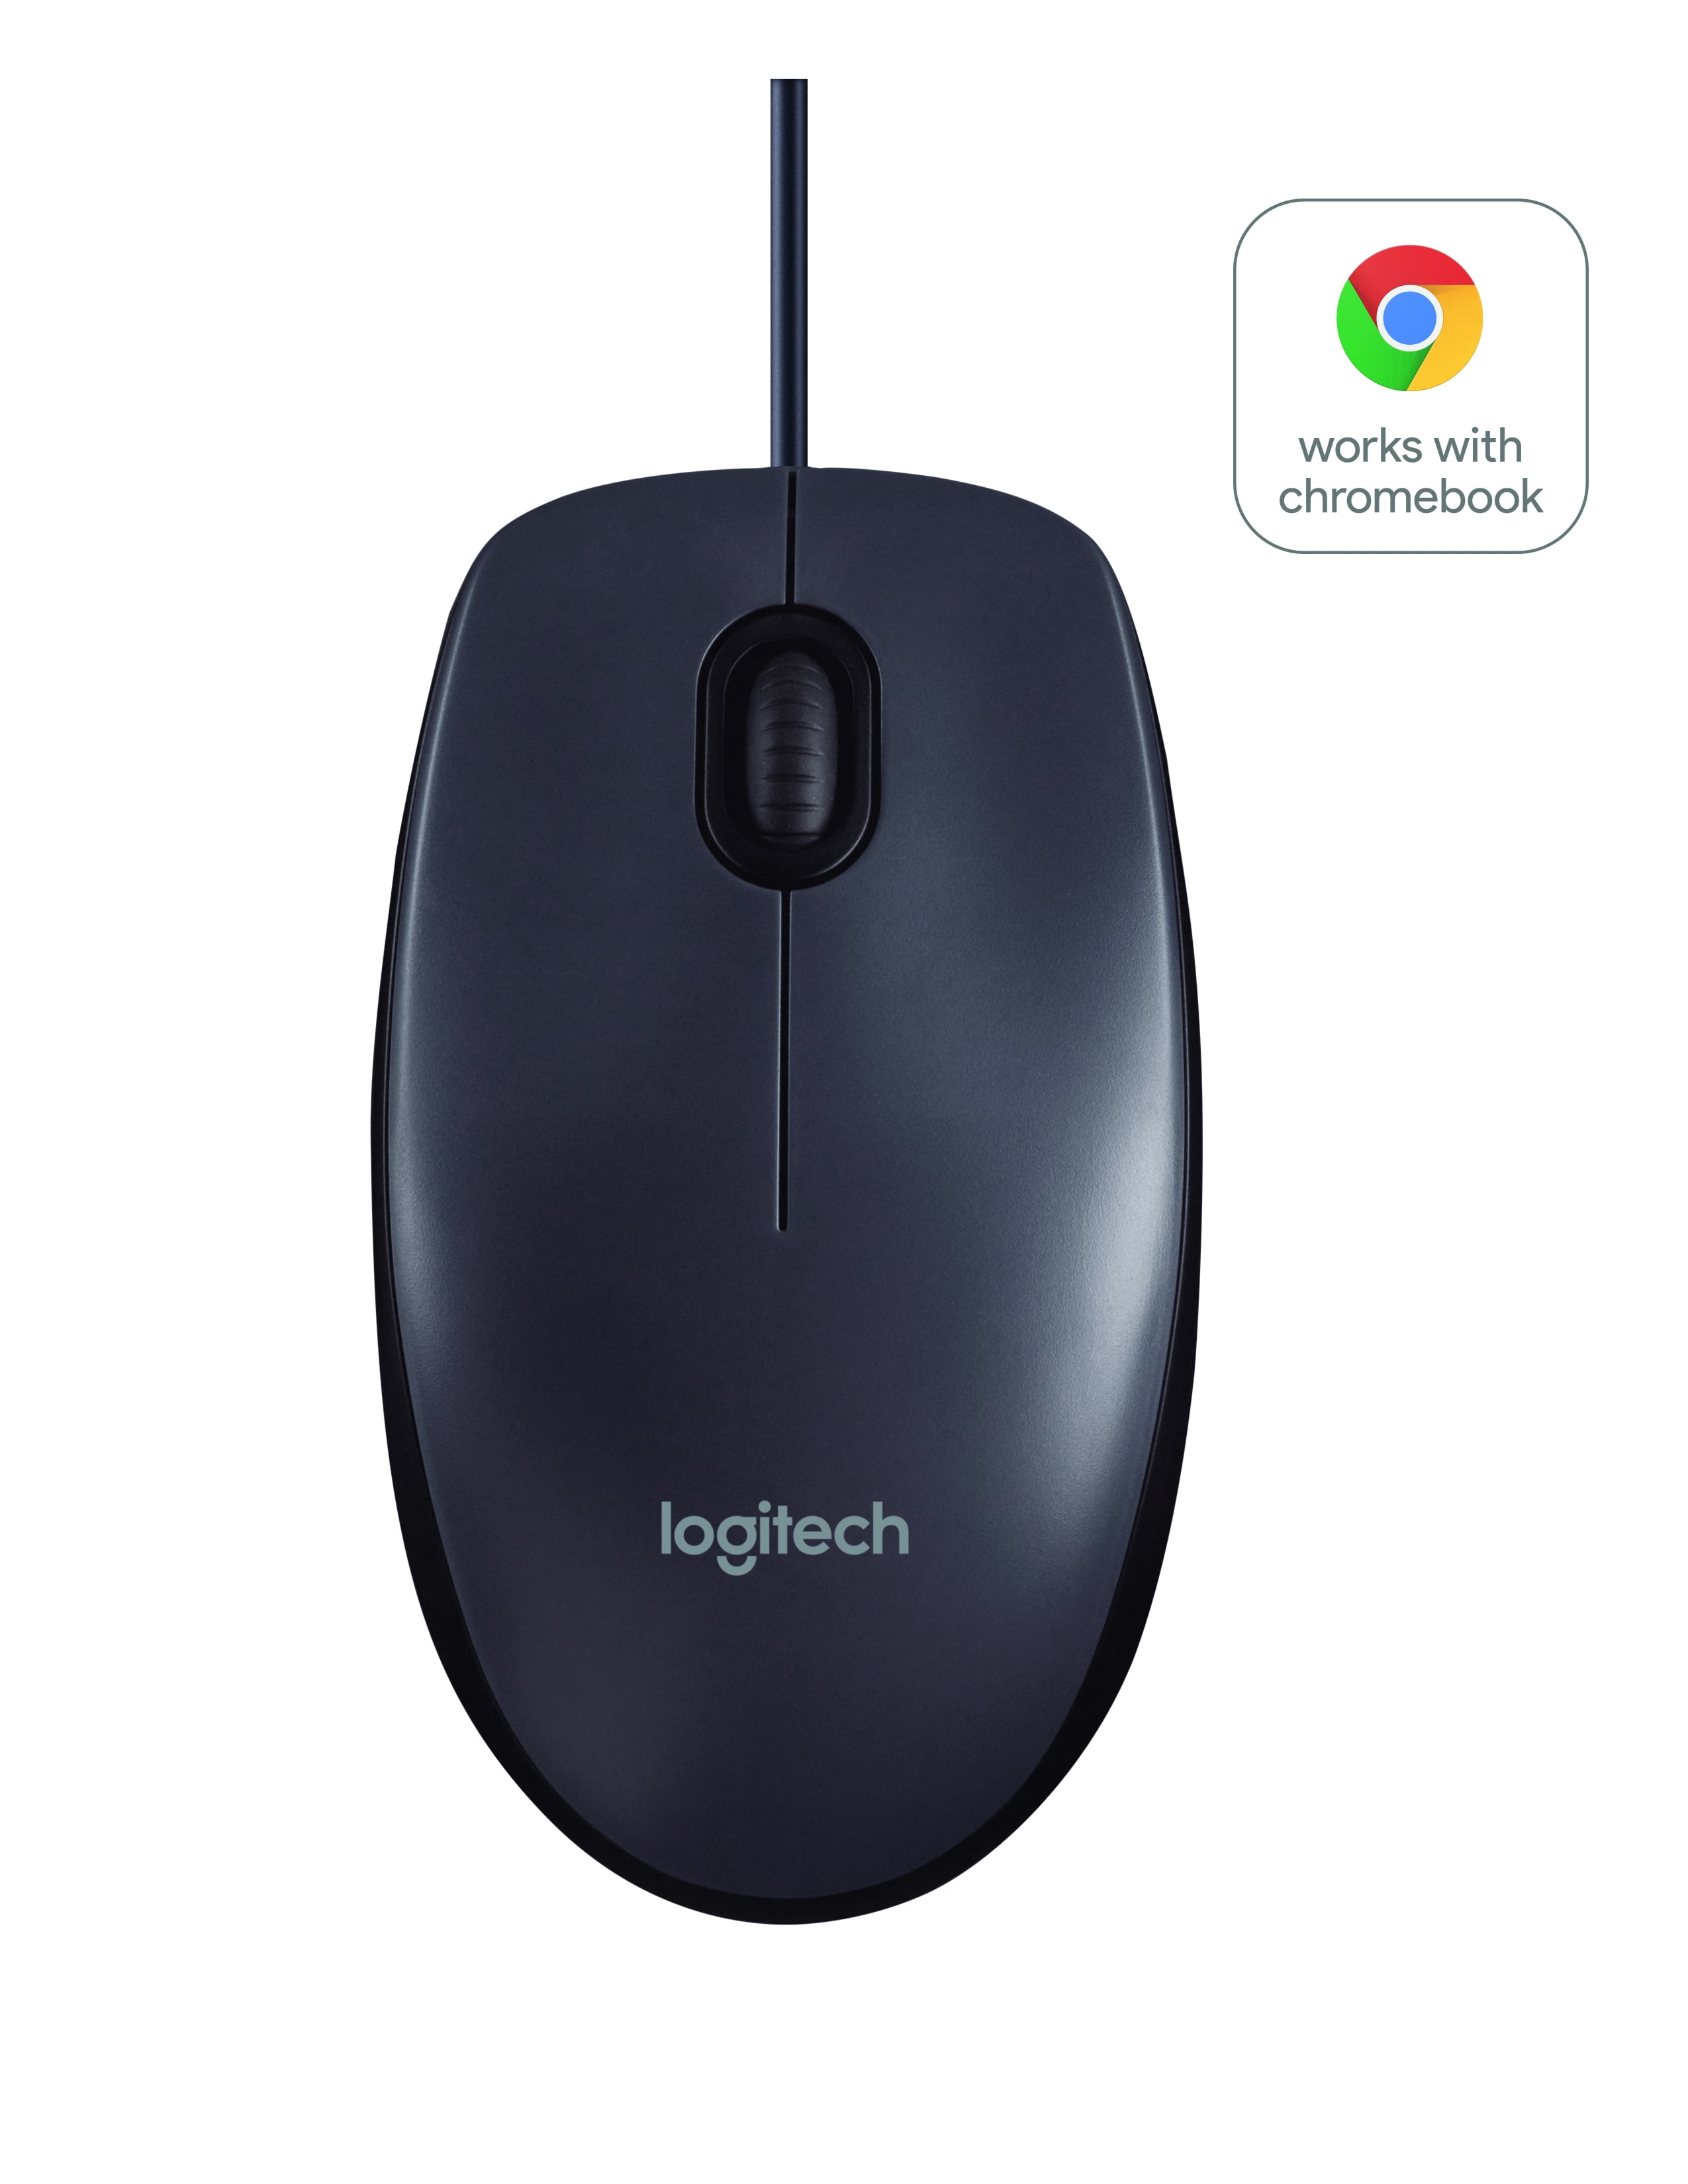 service World Record Guinness Book county Logitech M100 Wired USB Mouse, 3-Buttons,1000 DPI Optical Tracking,  Ambidextrous, Compatible with PC, Mac, Laptop, Gray - Walmart.com